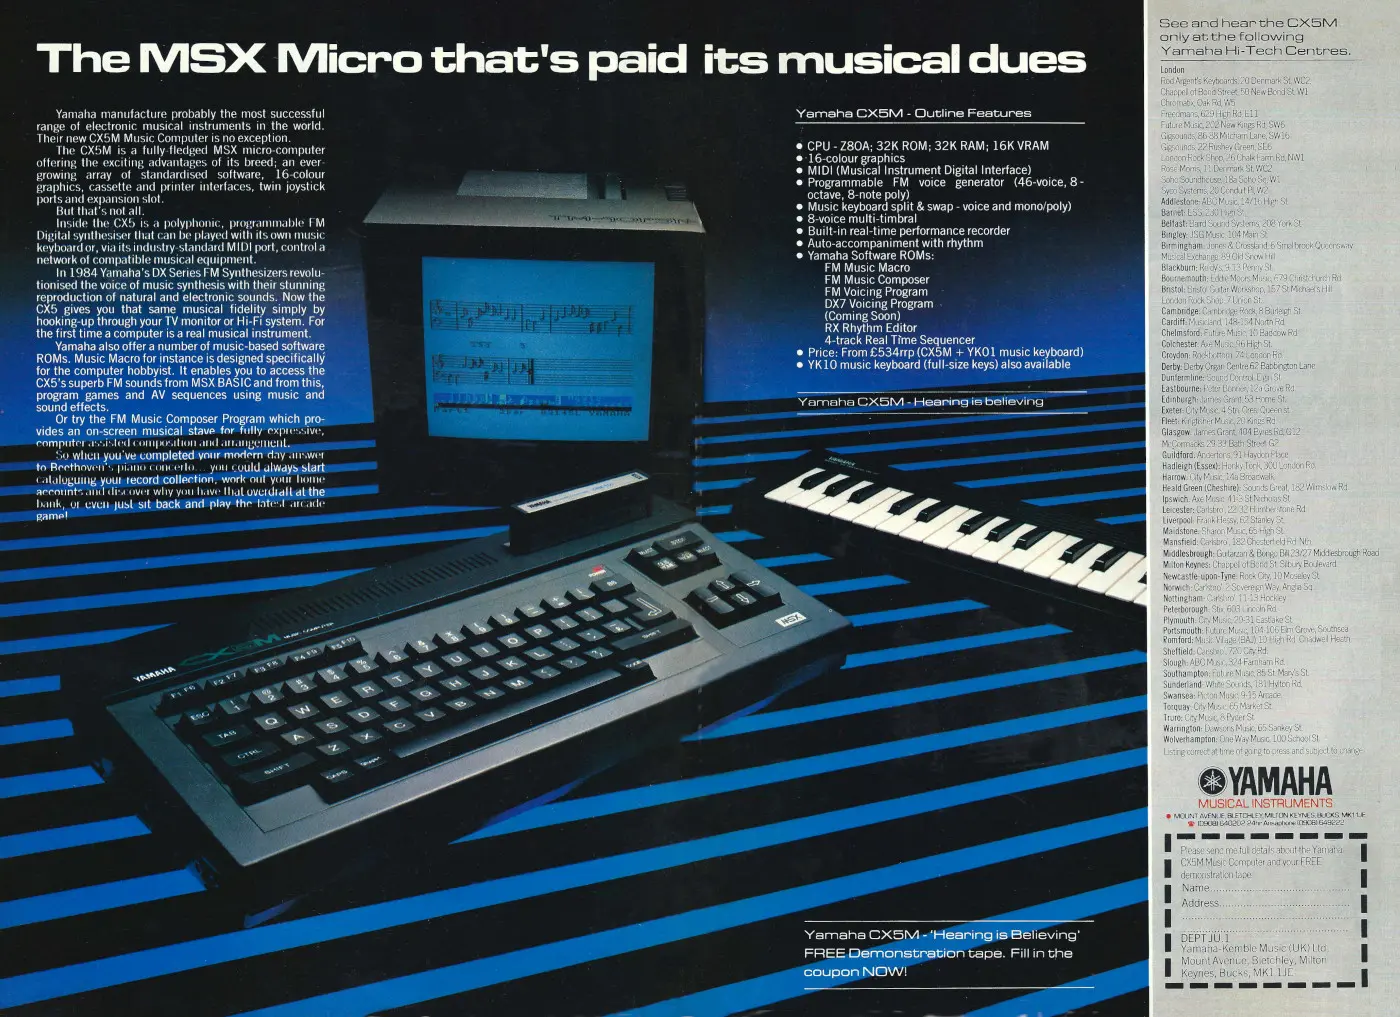 Yamaha Advert: The MSX micro that's paid its musical dues, from Your Computer, April 1985